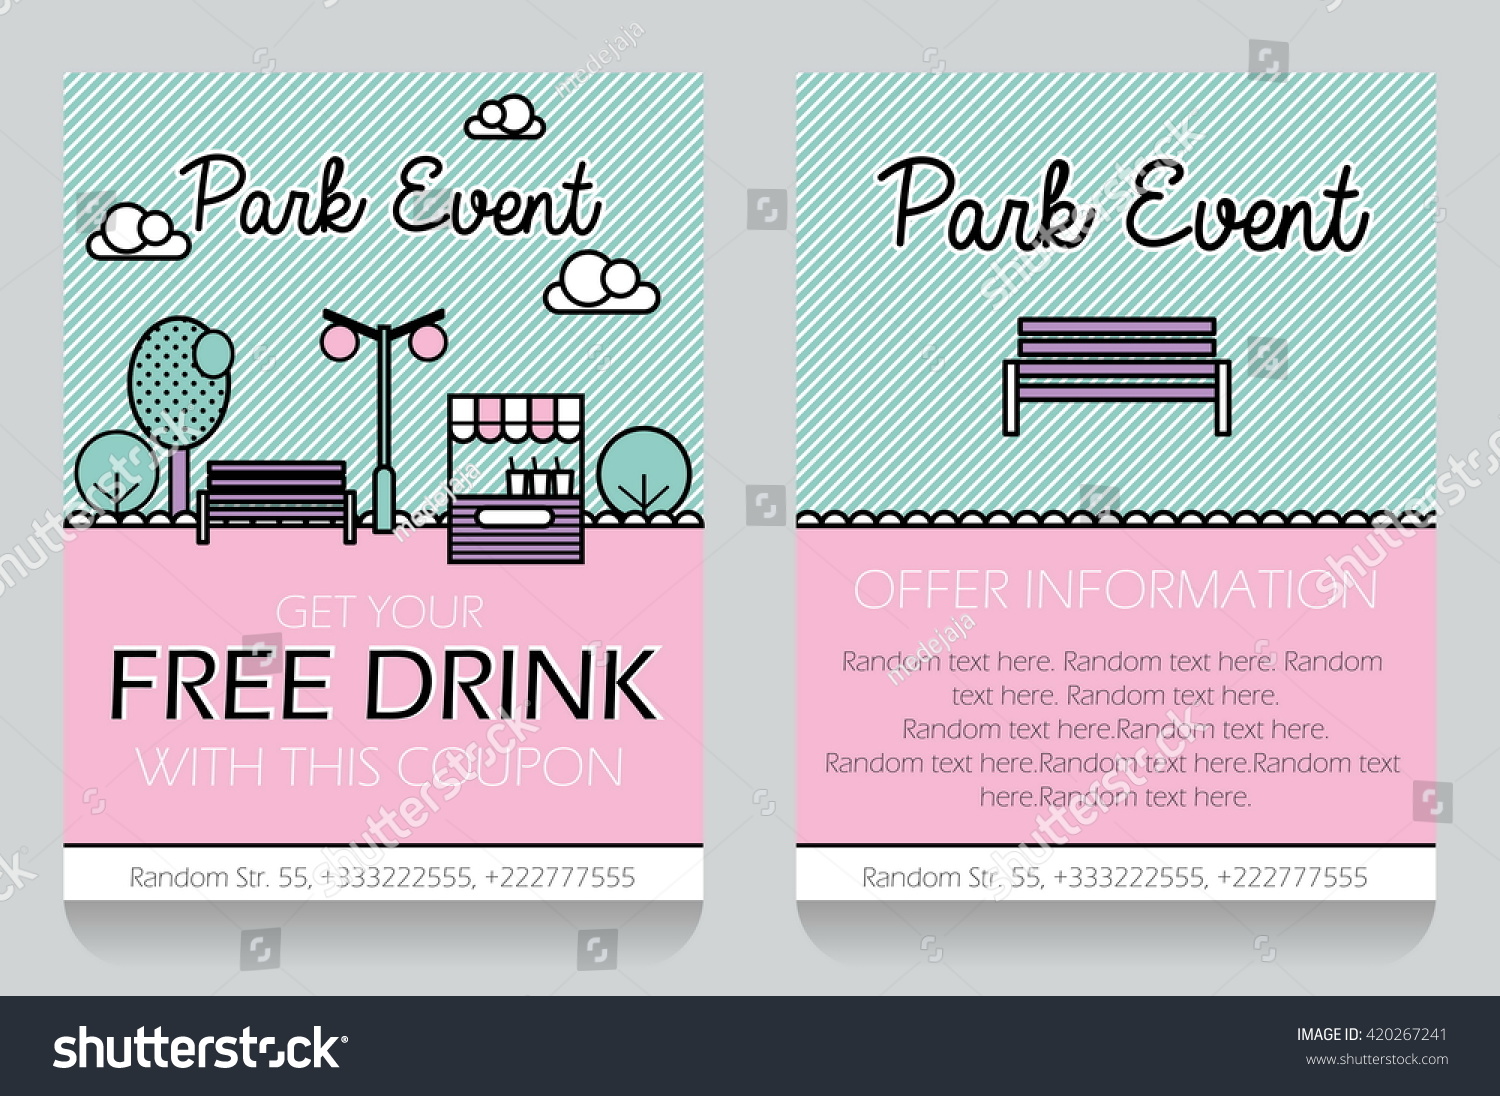 Trendy Minimalistic Icon Style Outdoor Park Stock Vector Royalty Free 420267241